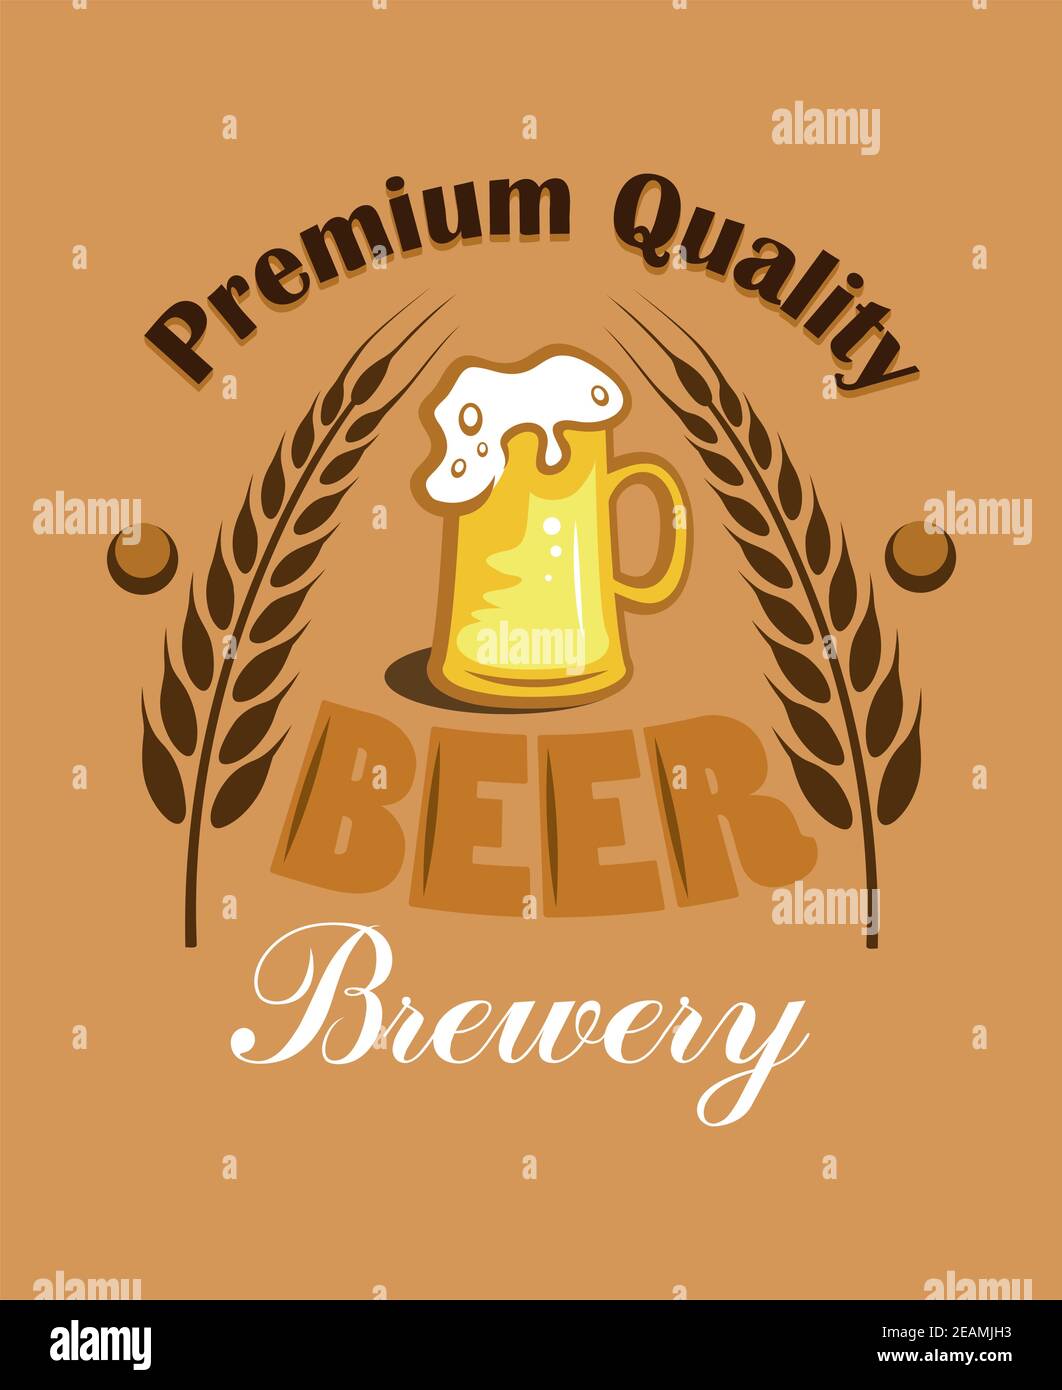 Premium Quality Beer - Brewery label with two ears of wheat or hops flanking an overflowing mug of golden lager with a frothy head on a brown backgrou Stock Vector